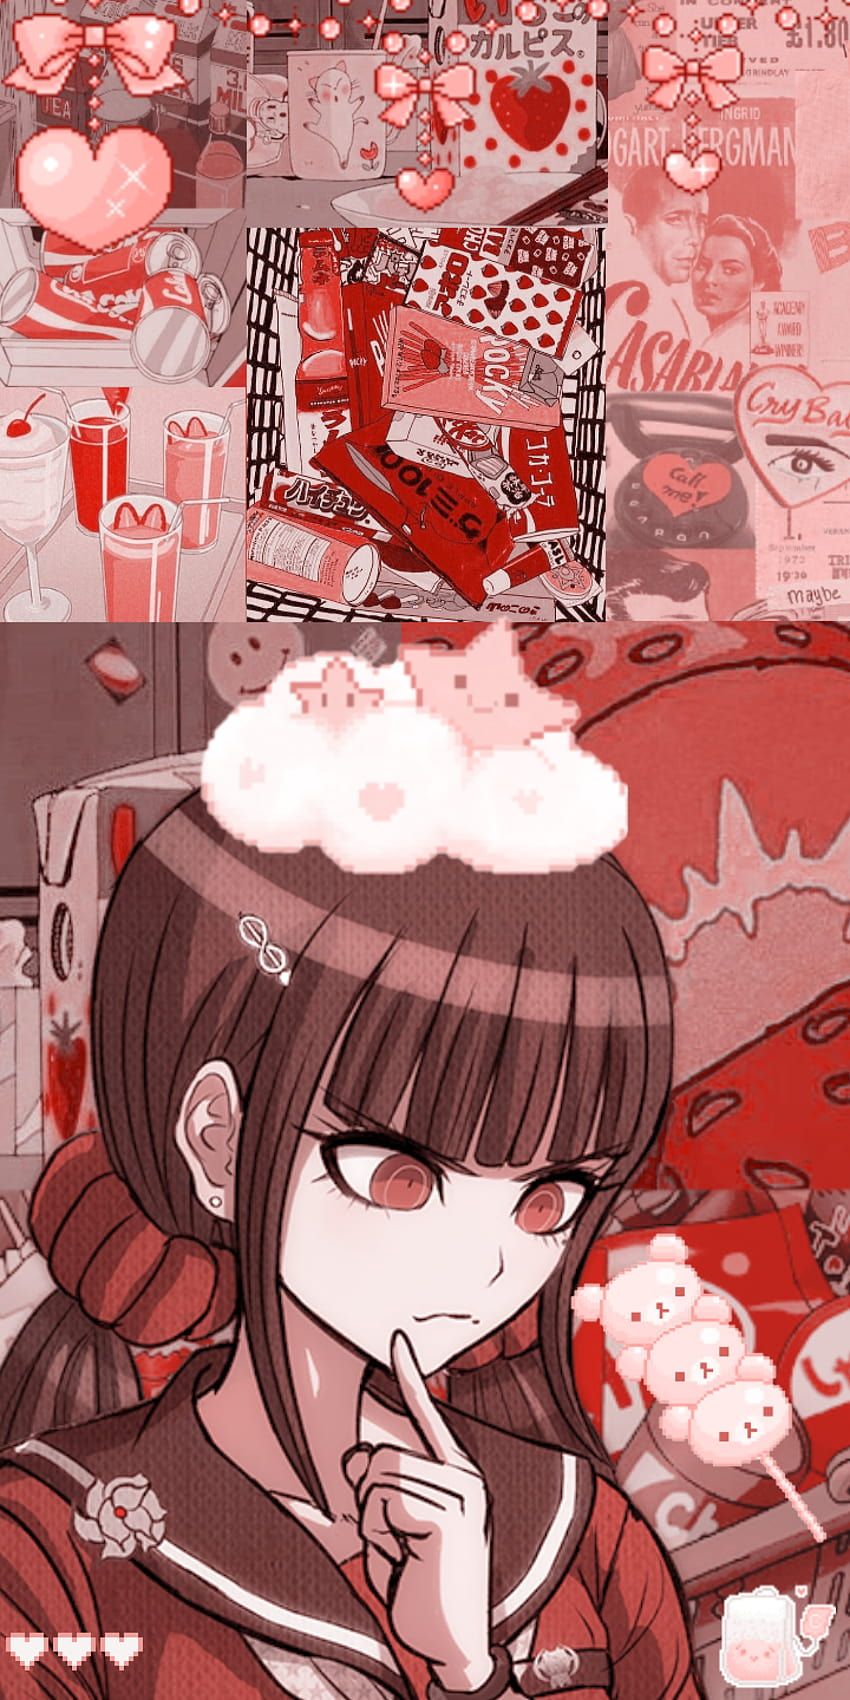 Aesthetic anime wallpaper for phone with a red background - Danganronpa